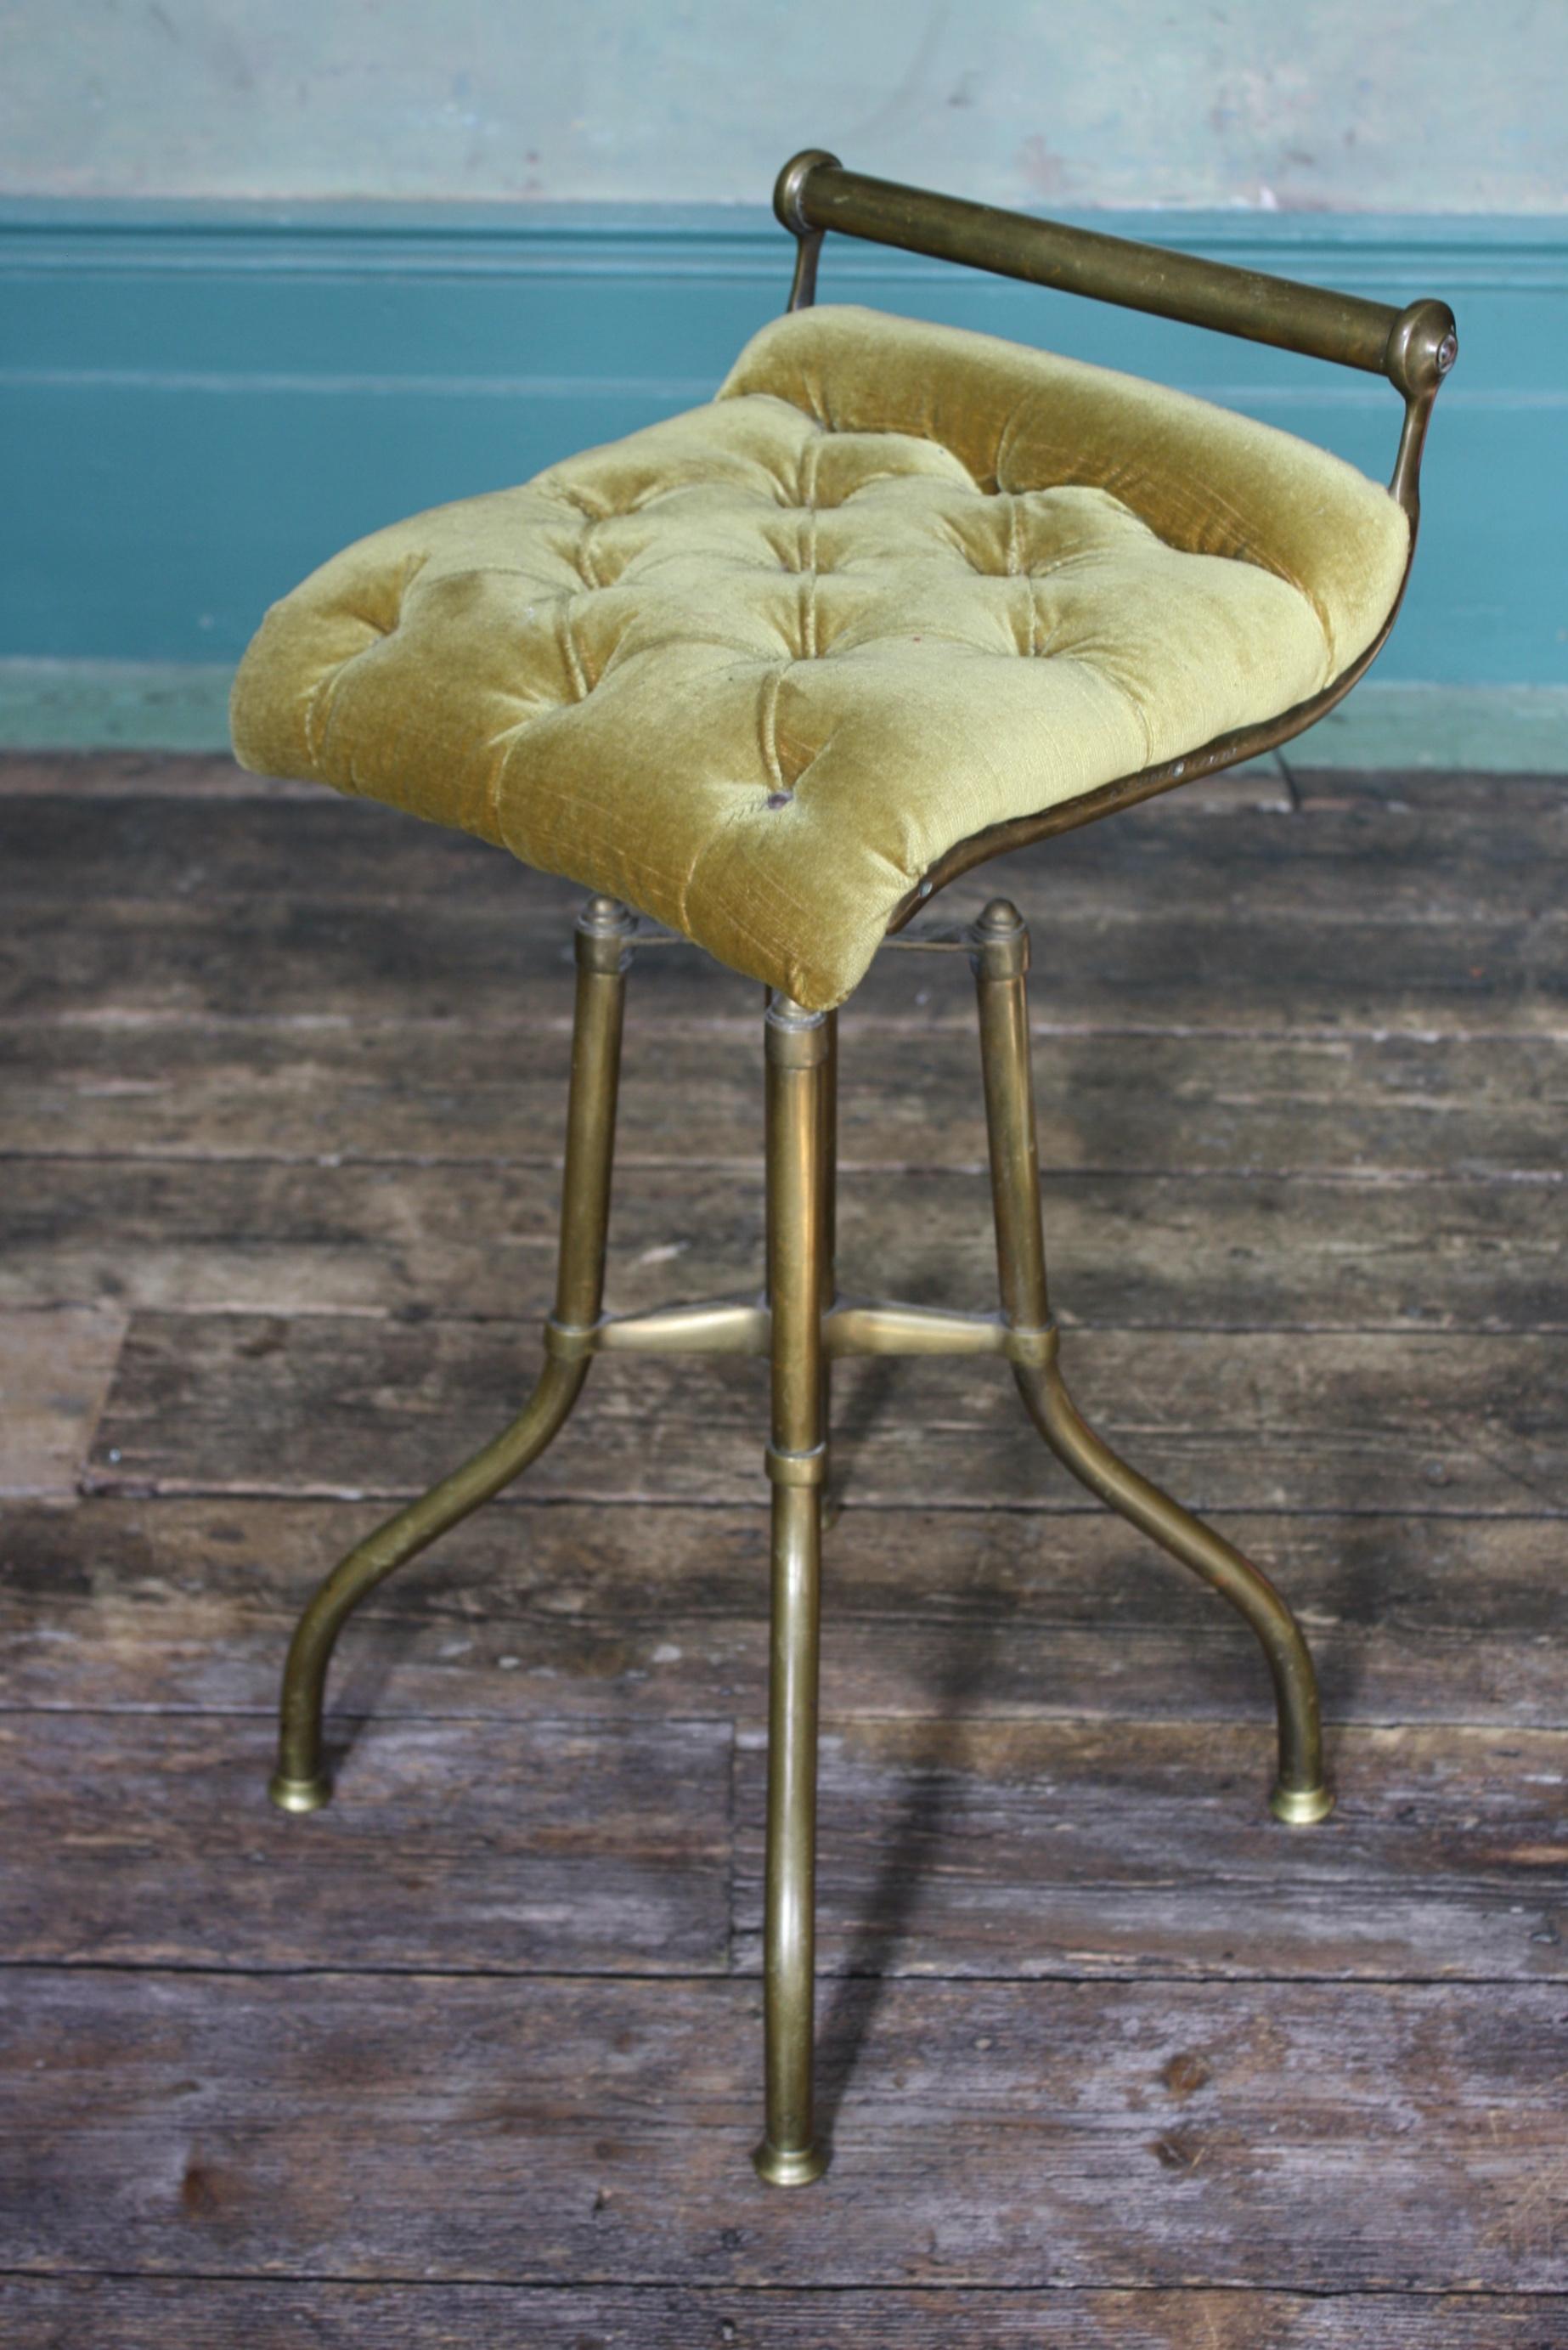 A very good example of a late Victorian music/Cello adjustable stool.

Formed from tubular and cast brass, with the C. H. Hare Stamp, a deep buttoned mustard yellow velvet seat.

The seat adjusts on a large screw system, the brass has age